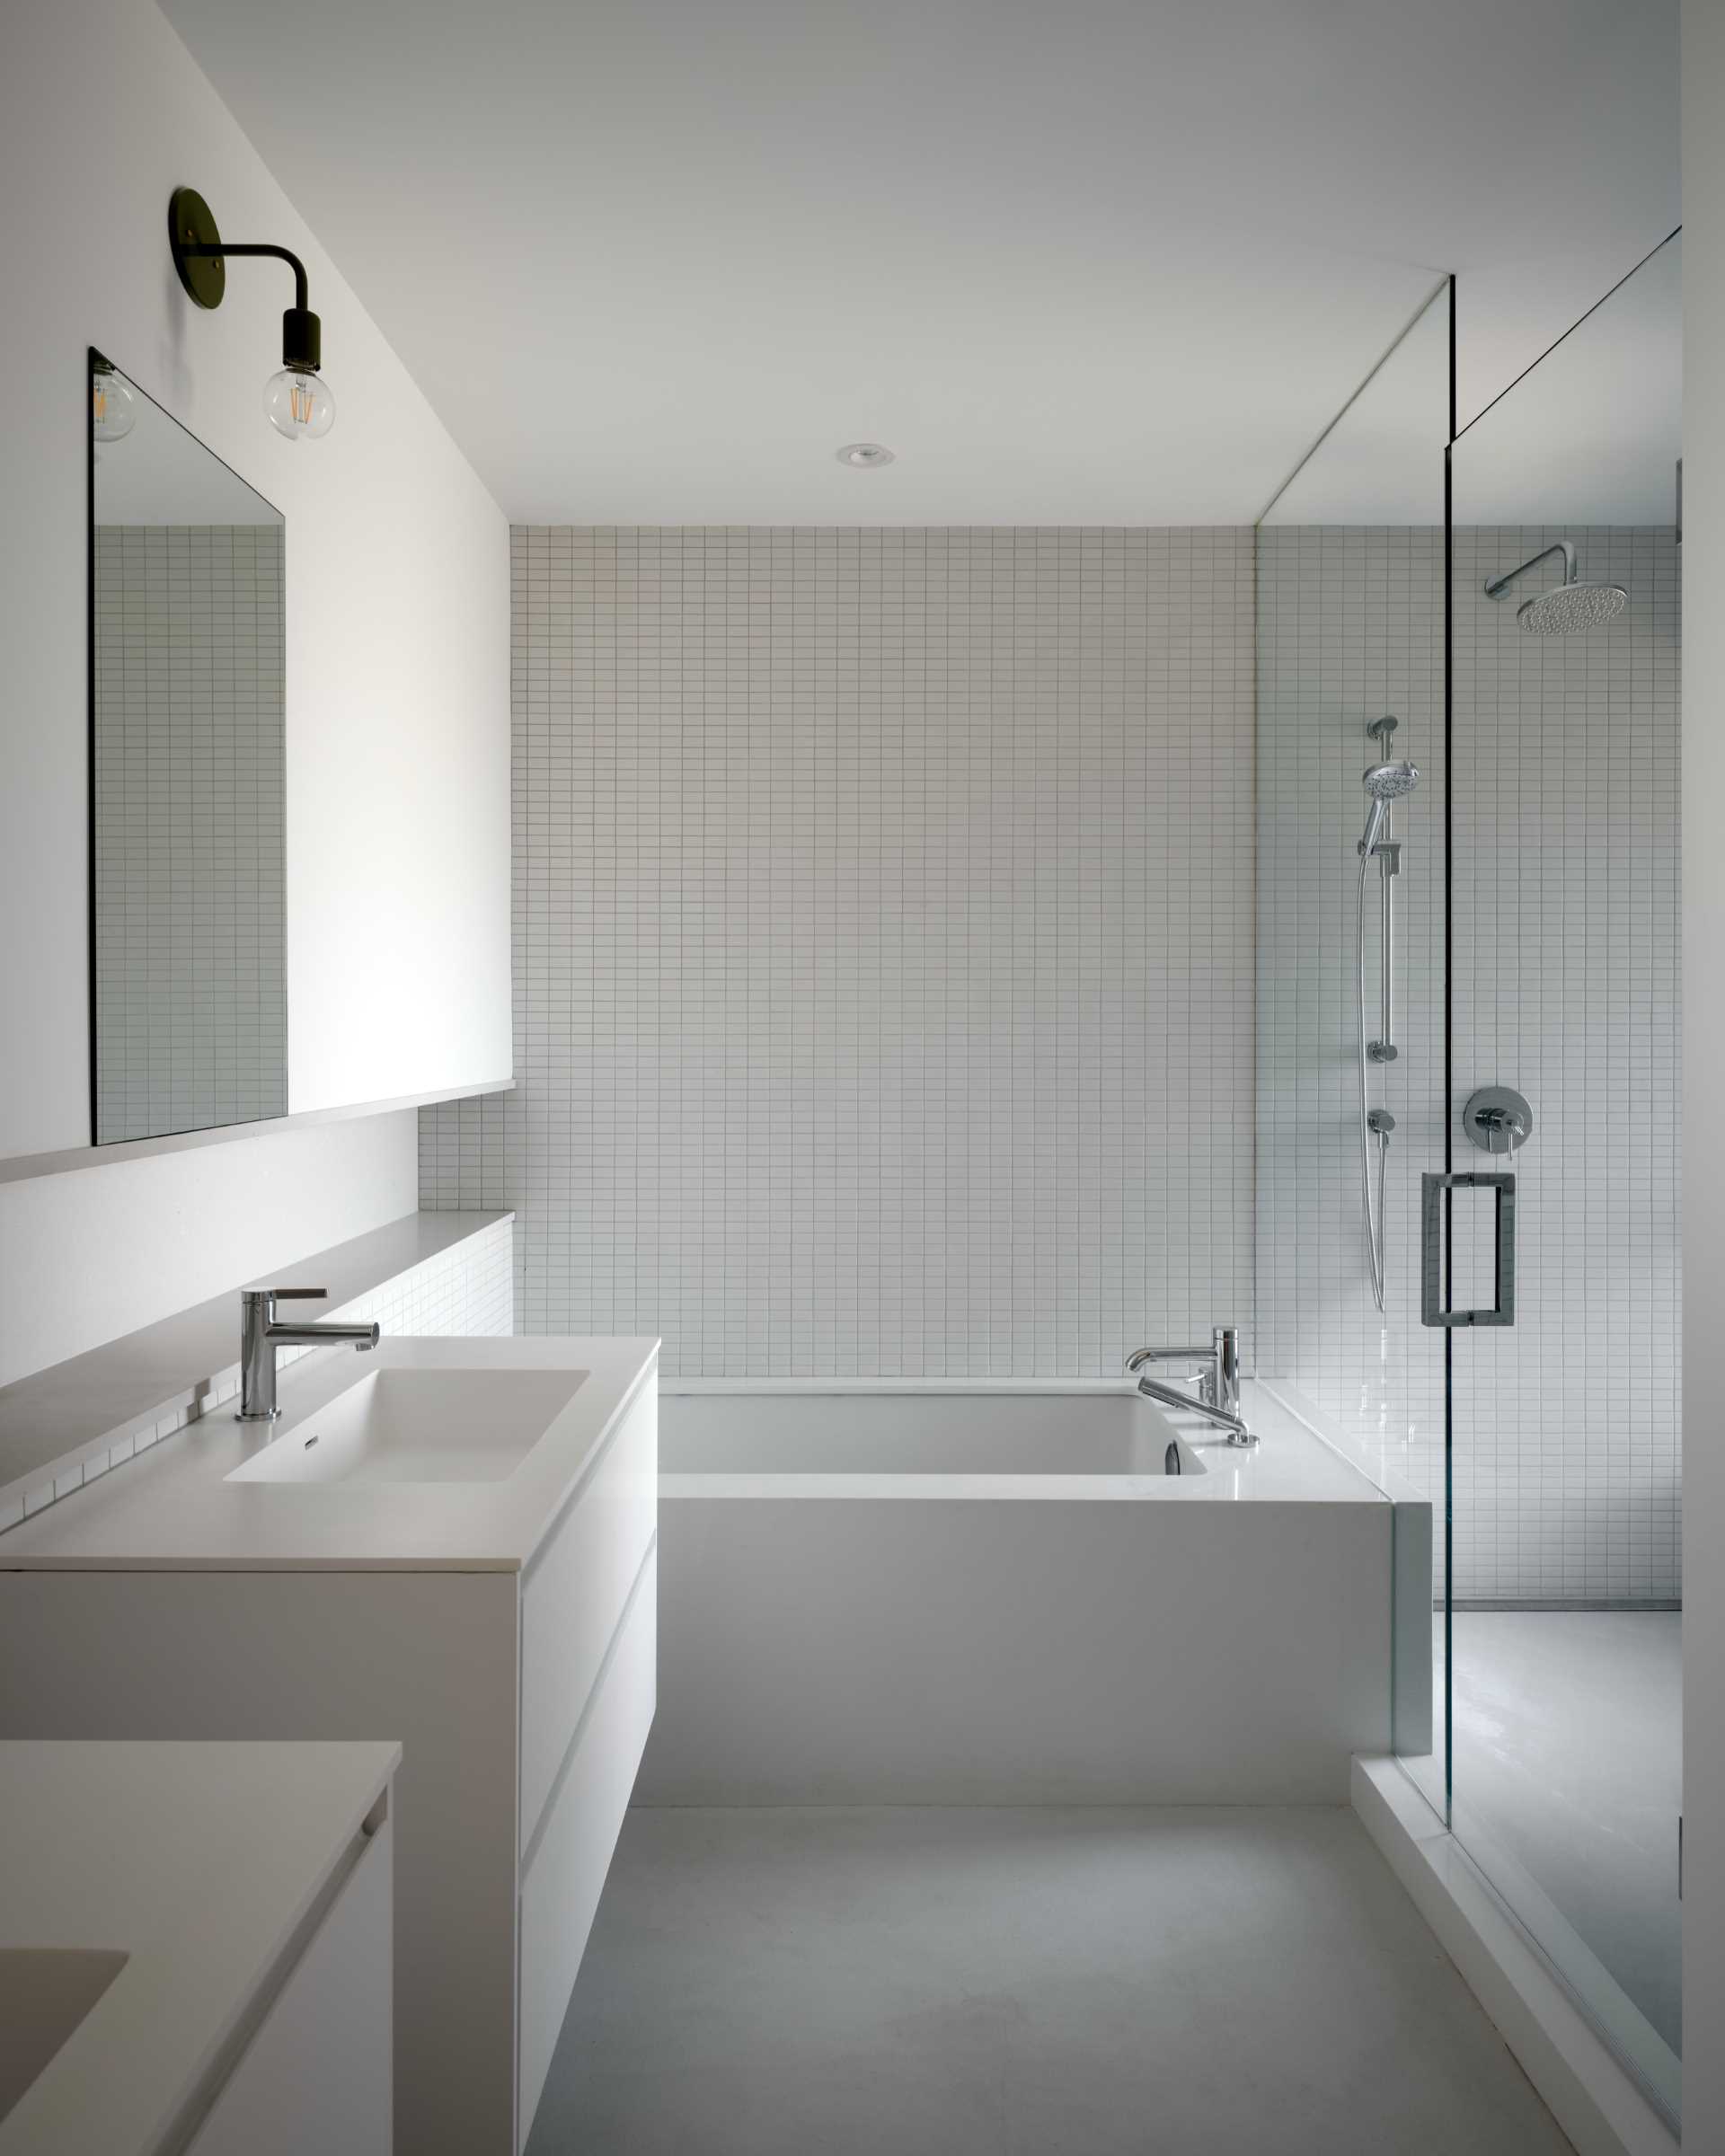 A modern bathroom has a built-in bathtub with a wall of tiles that continue through to the s،wer.